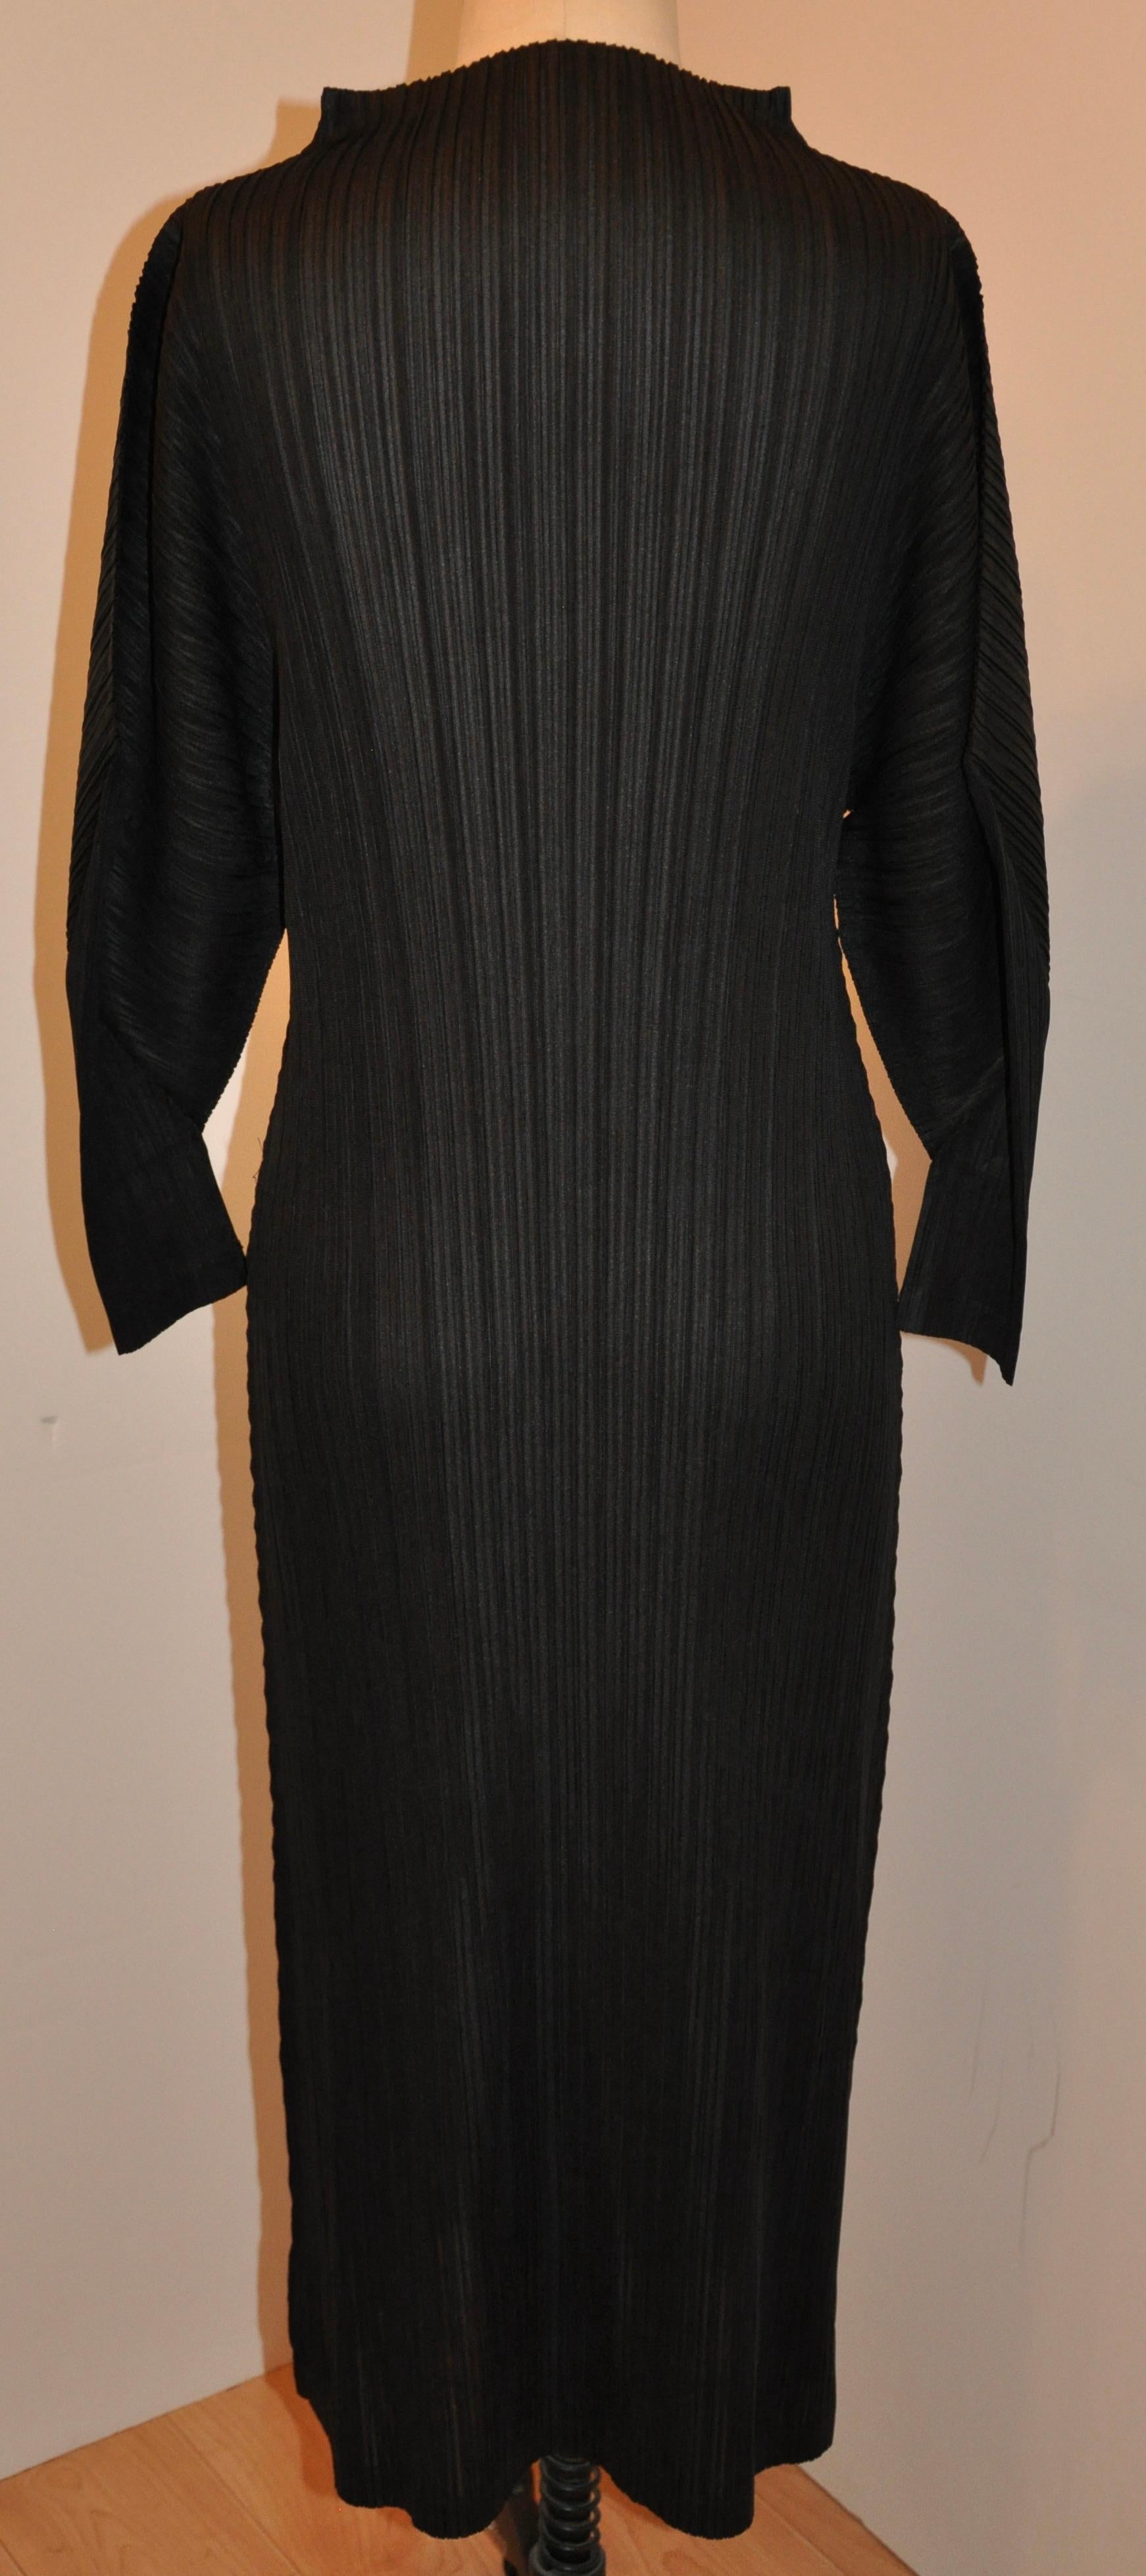 Issey Miyake Iconic Signature Jet-Black High-Neck Pullover Dress For Sale 13